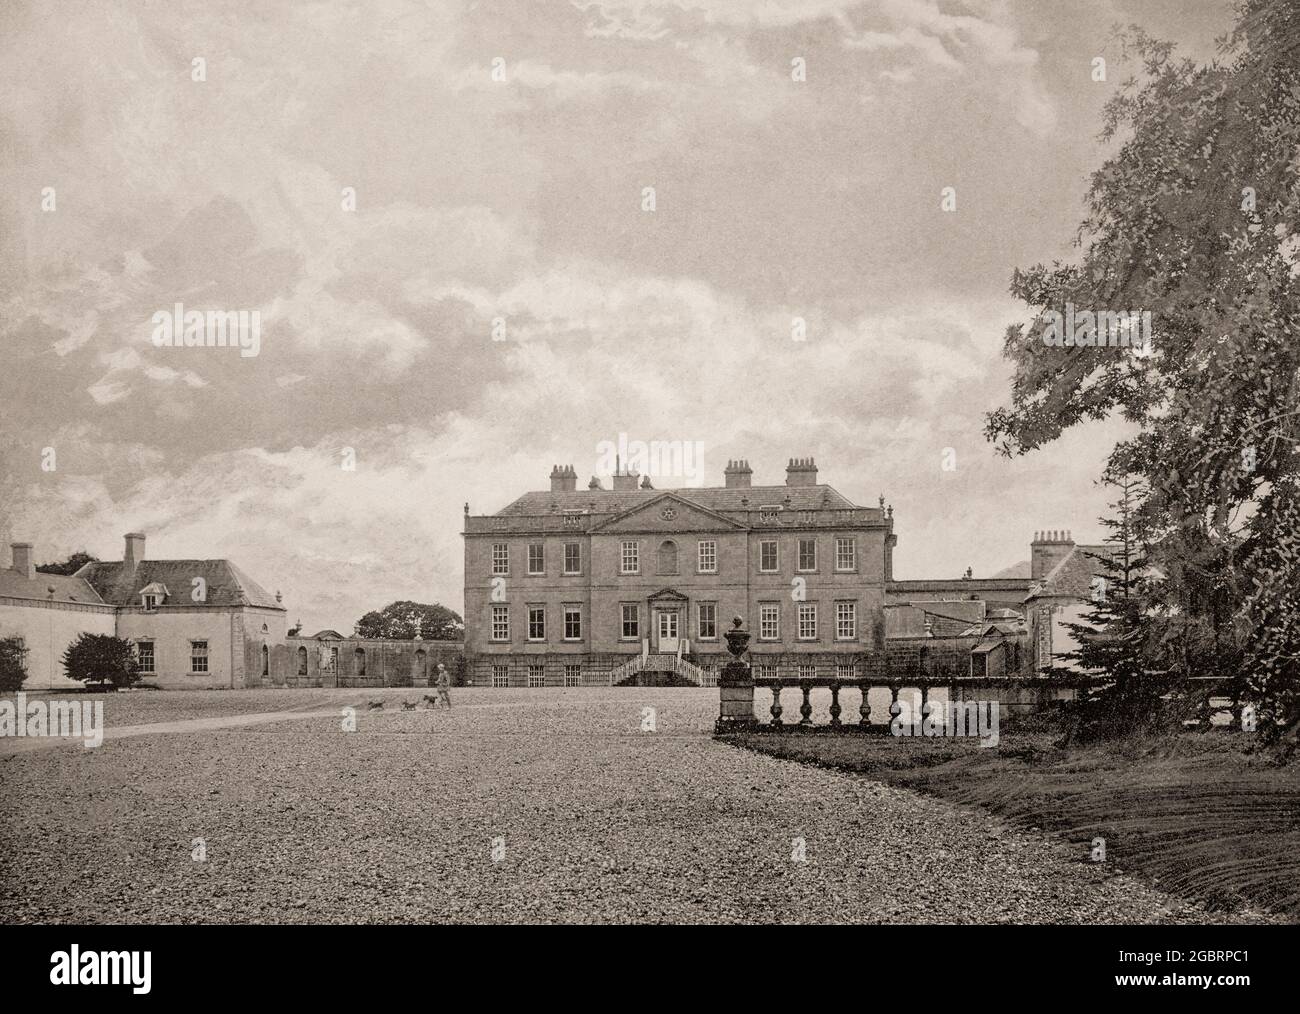 A late 19th century view of  Bessbrough House just outside Piltown in County Kilkenny, the family seat of the Ponsonby dynasty, Earls of Bessborough. Originally built in the 1740s to a design by Francis Bindon, the house was gutted by fire in February 1923, during the Irish Civil War. However, it was rebuilt in late 1929 for The 9th Earl of Bessborough and later became an agricultural college. Stock Photo